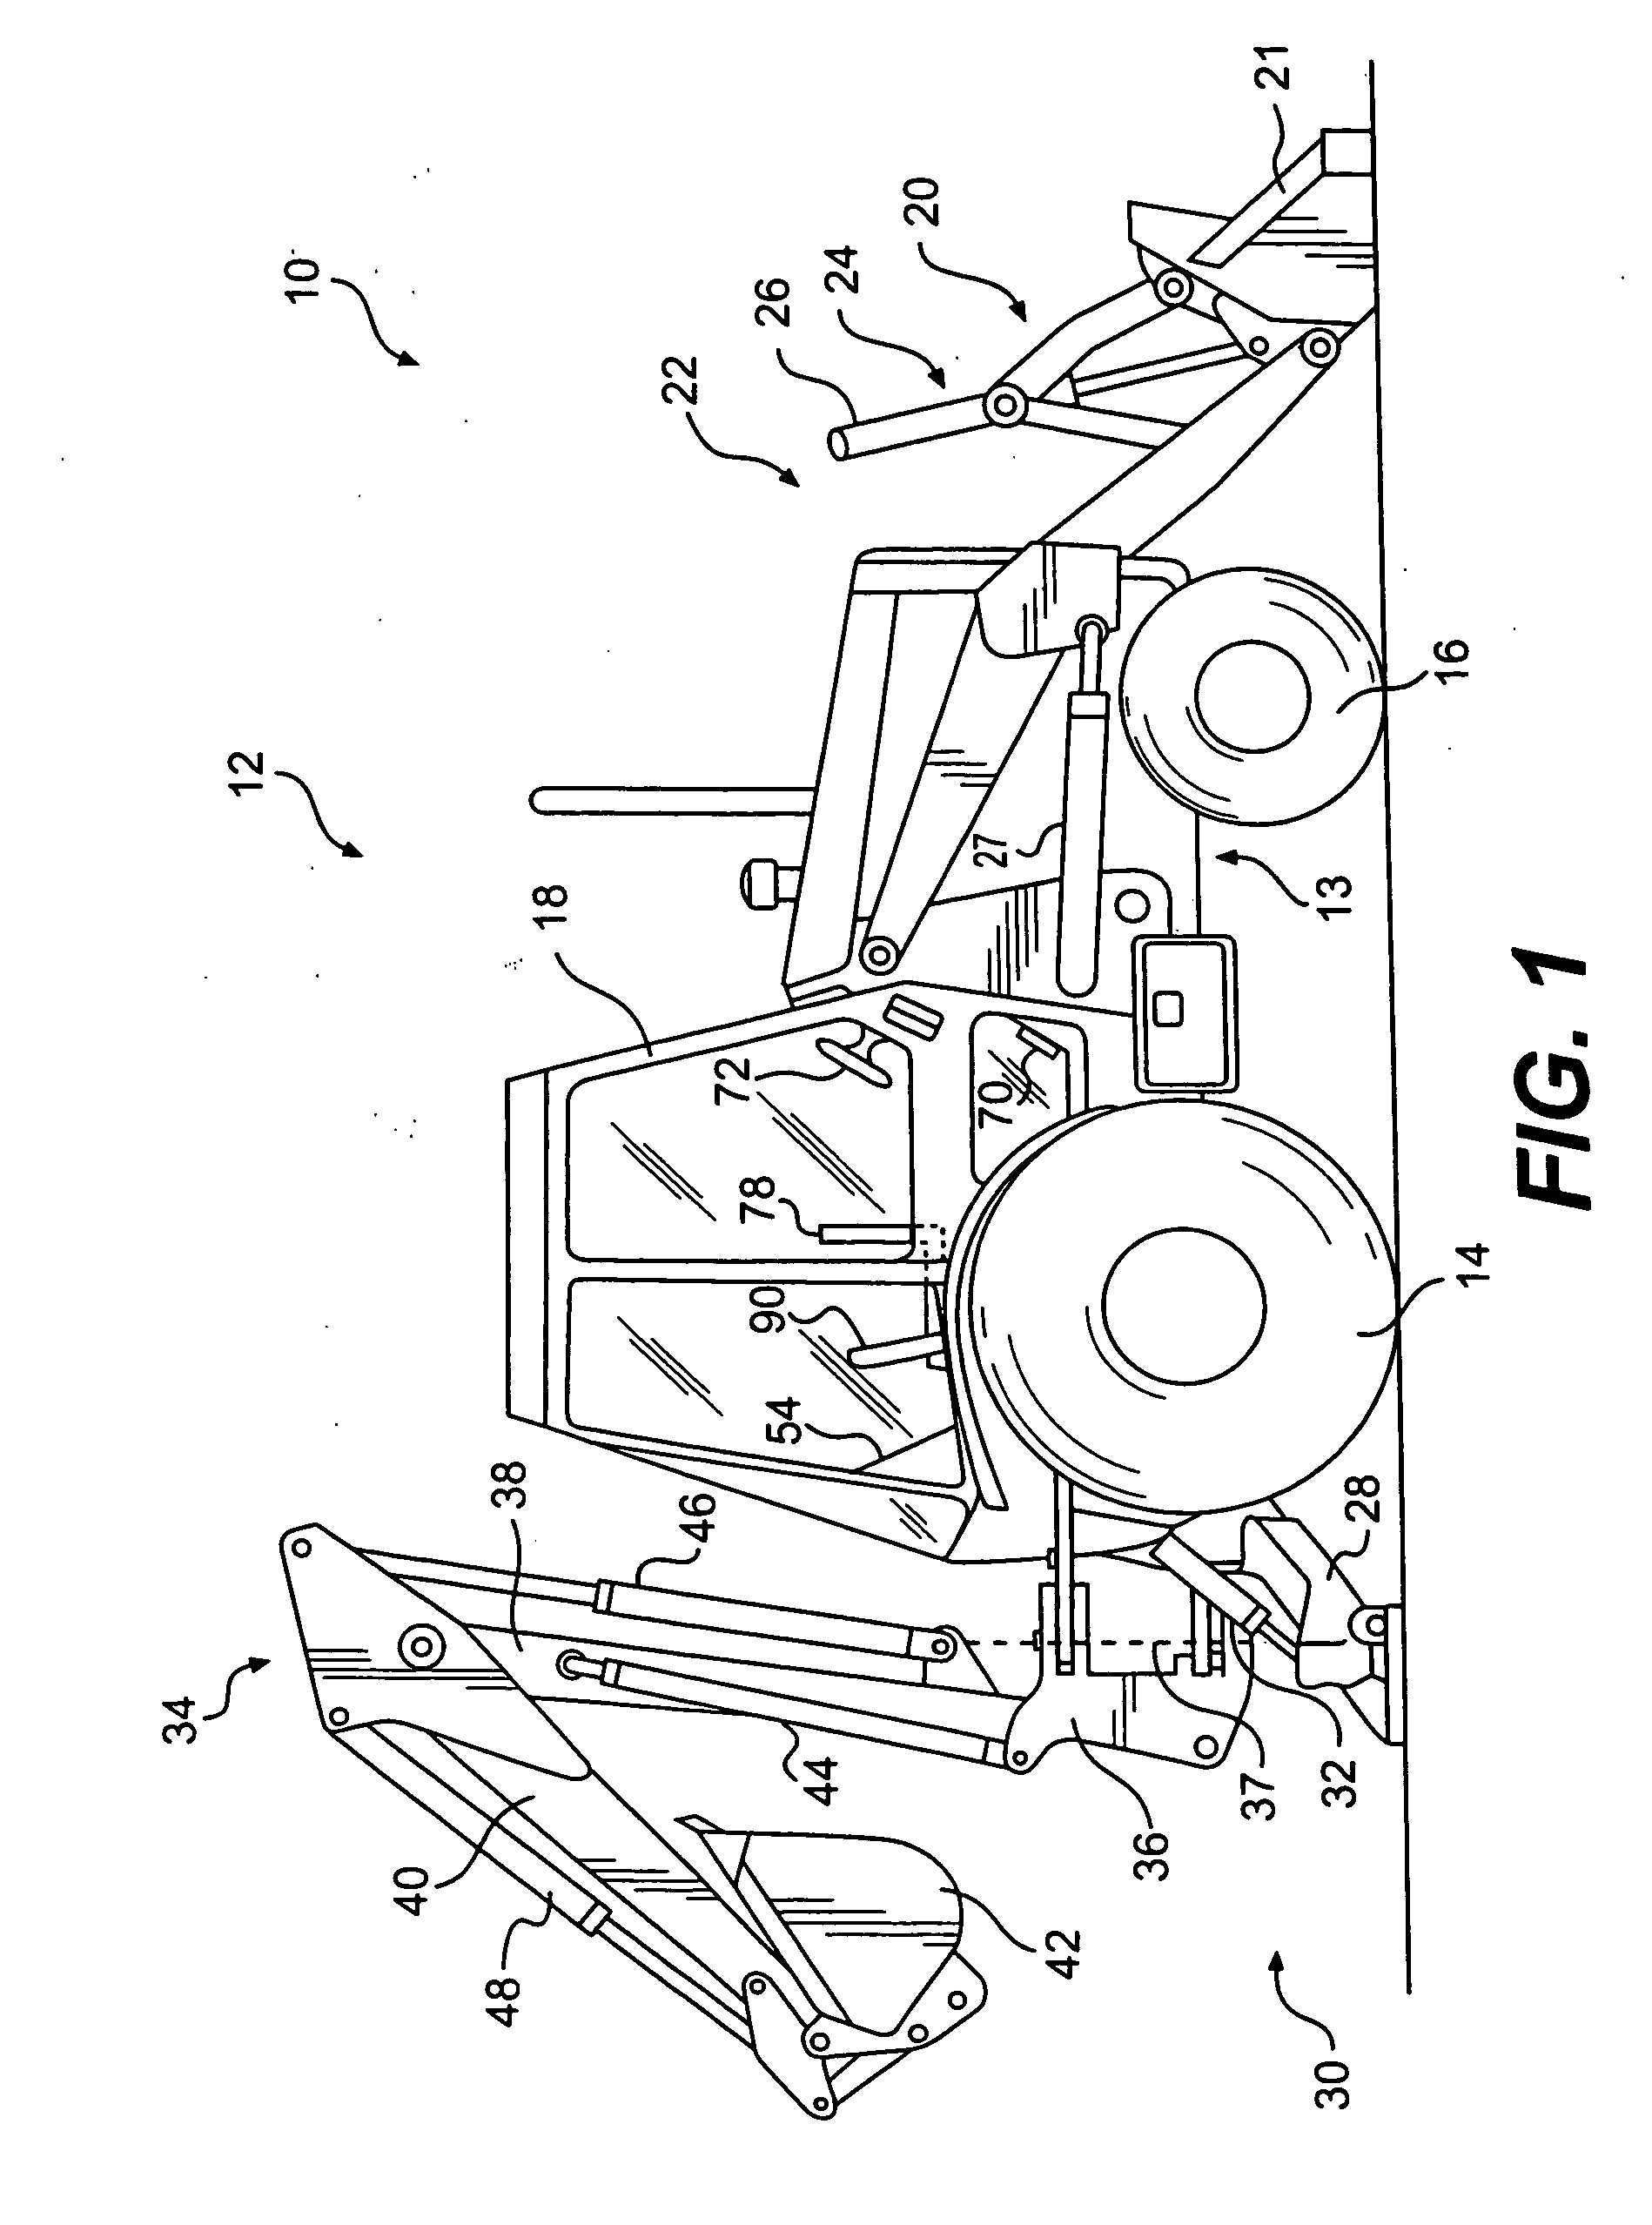 Automated machine repositioning in an excavating operation